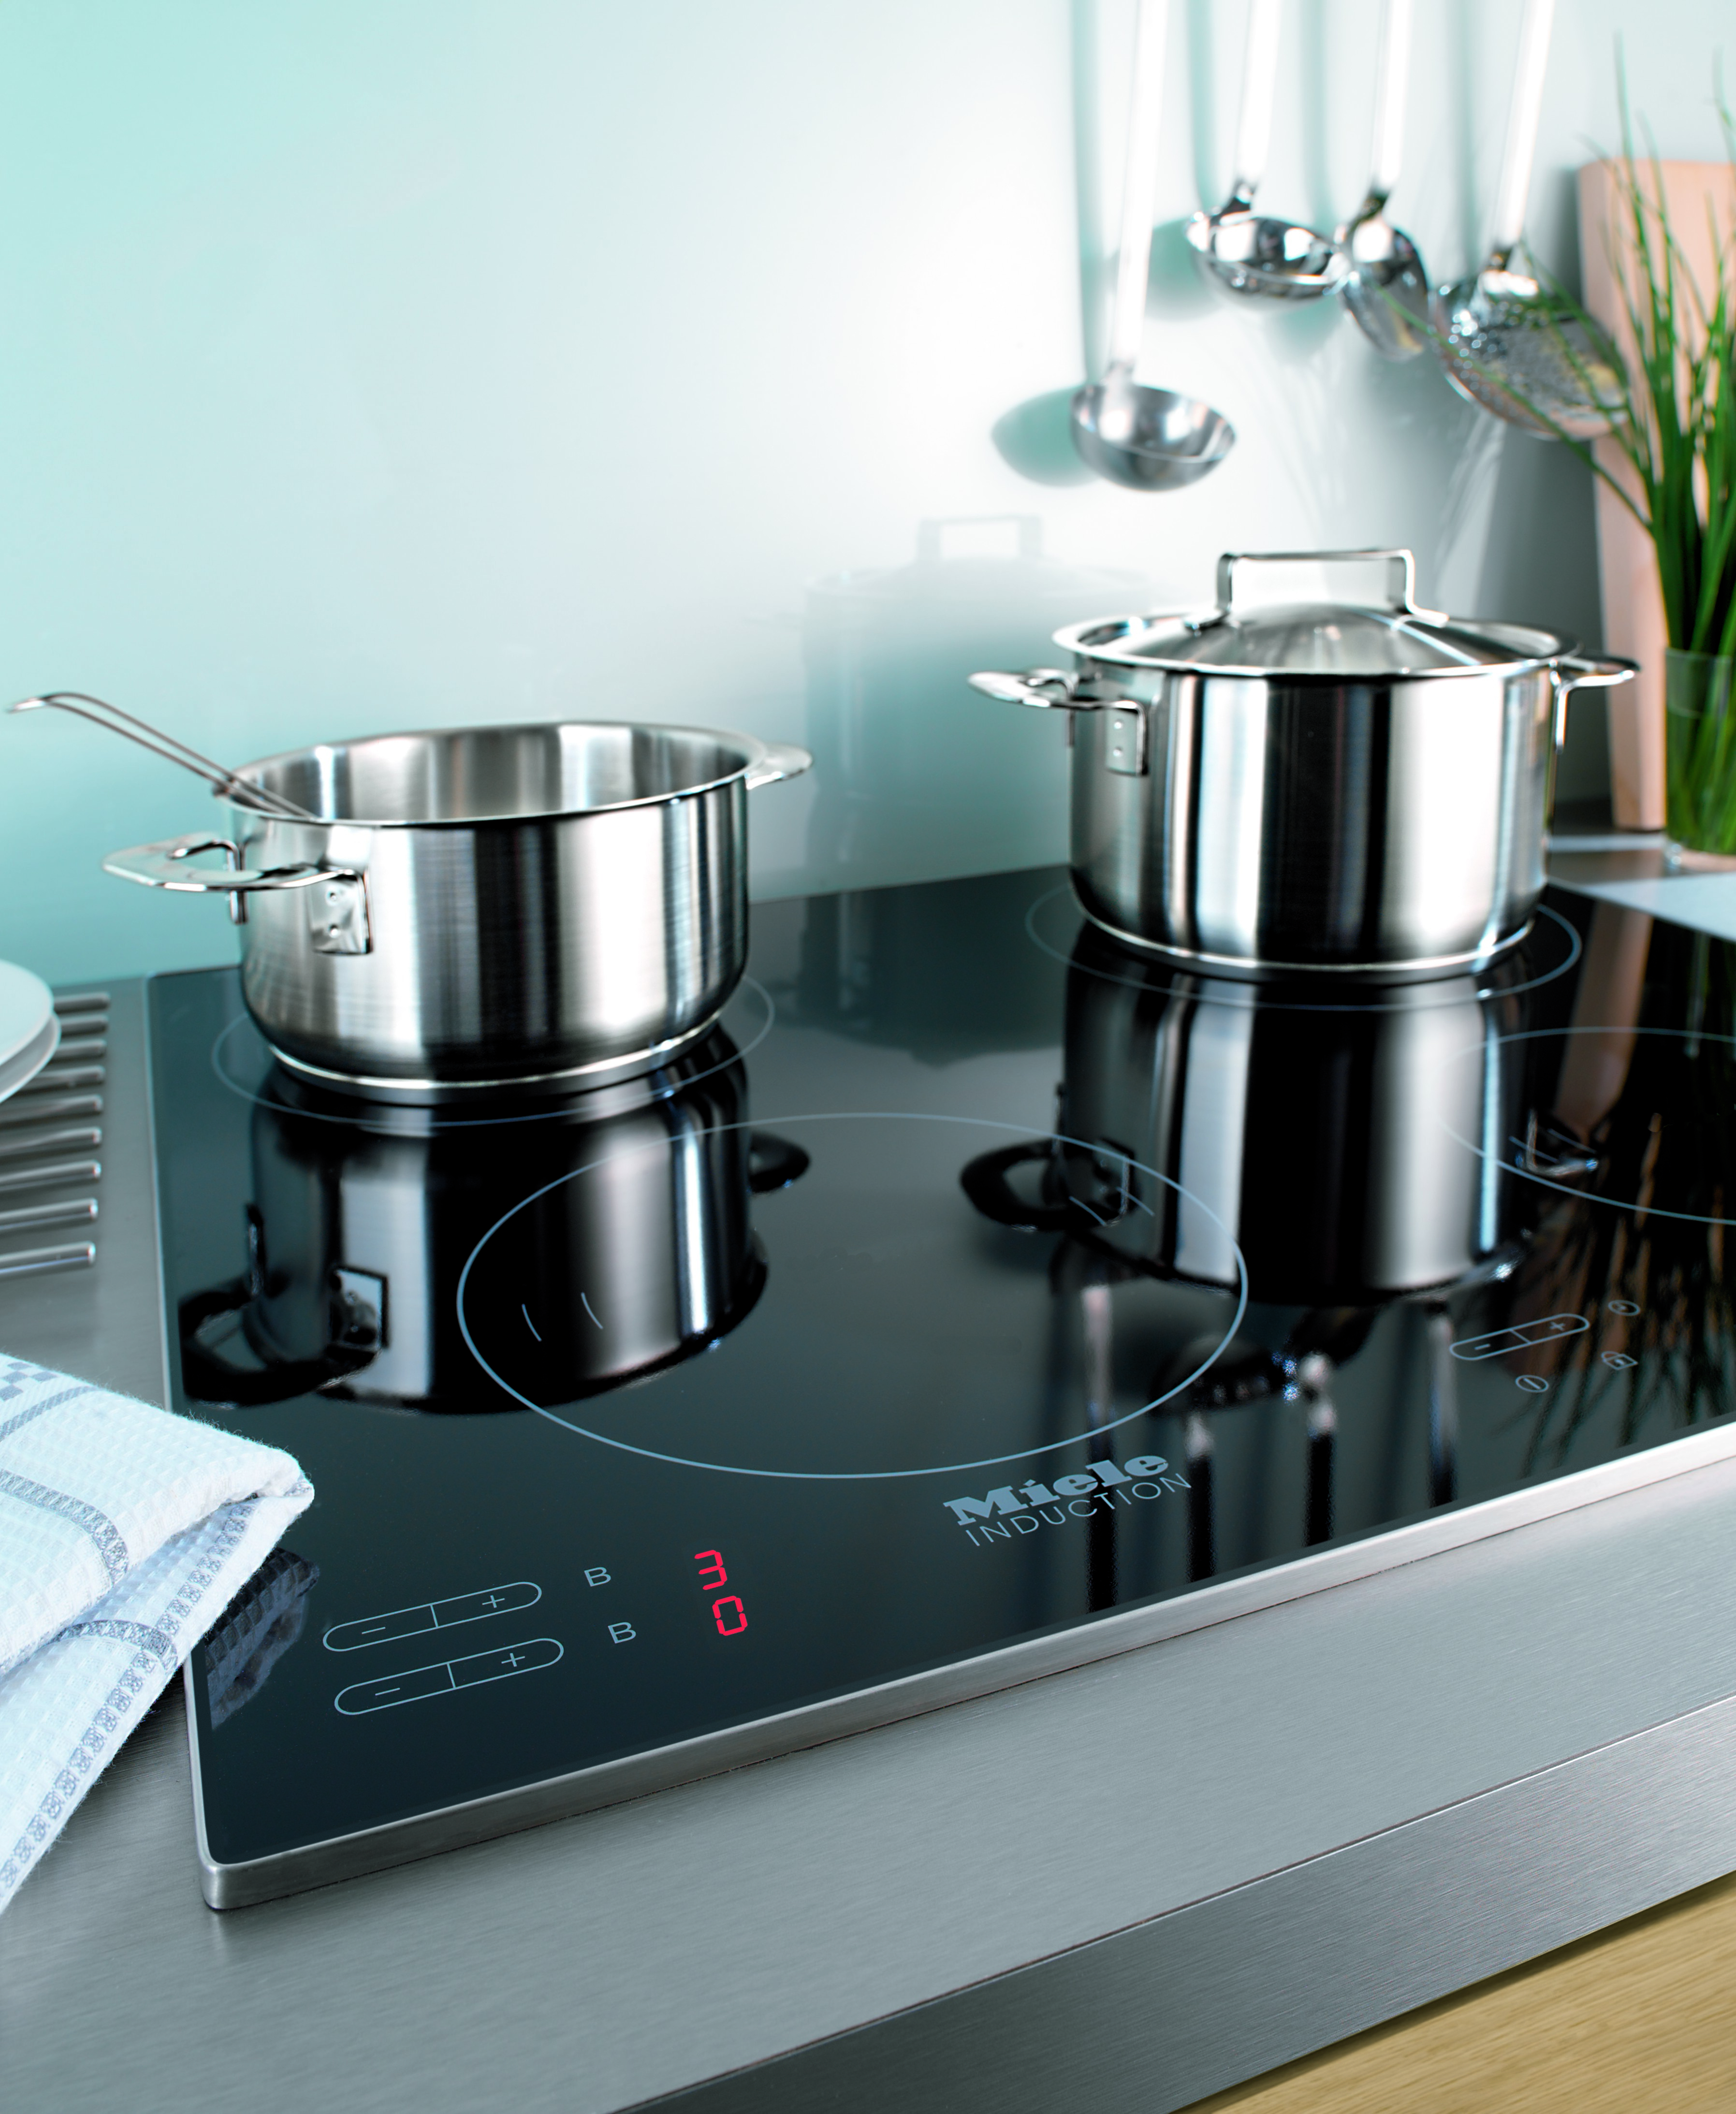 Miele Cooktops Electric